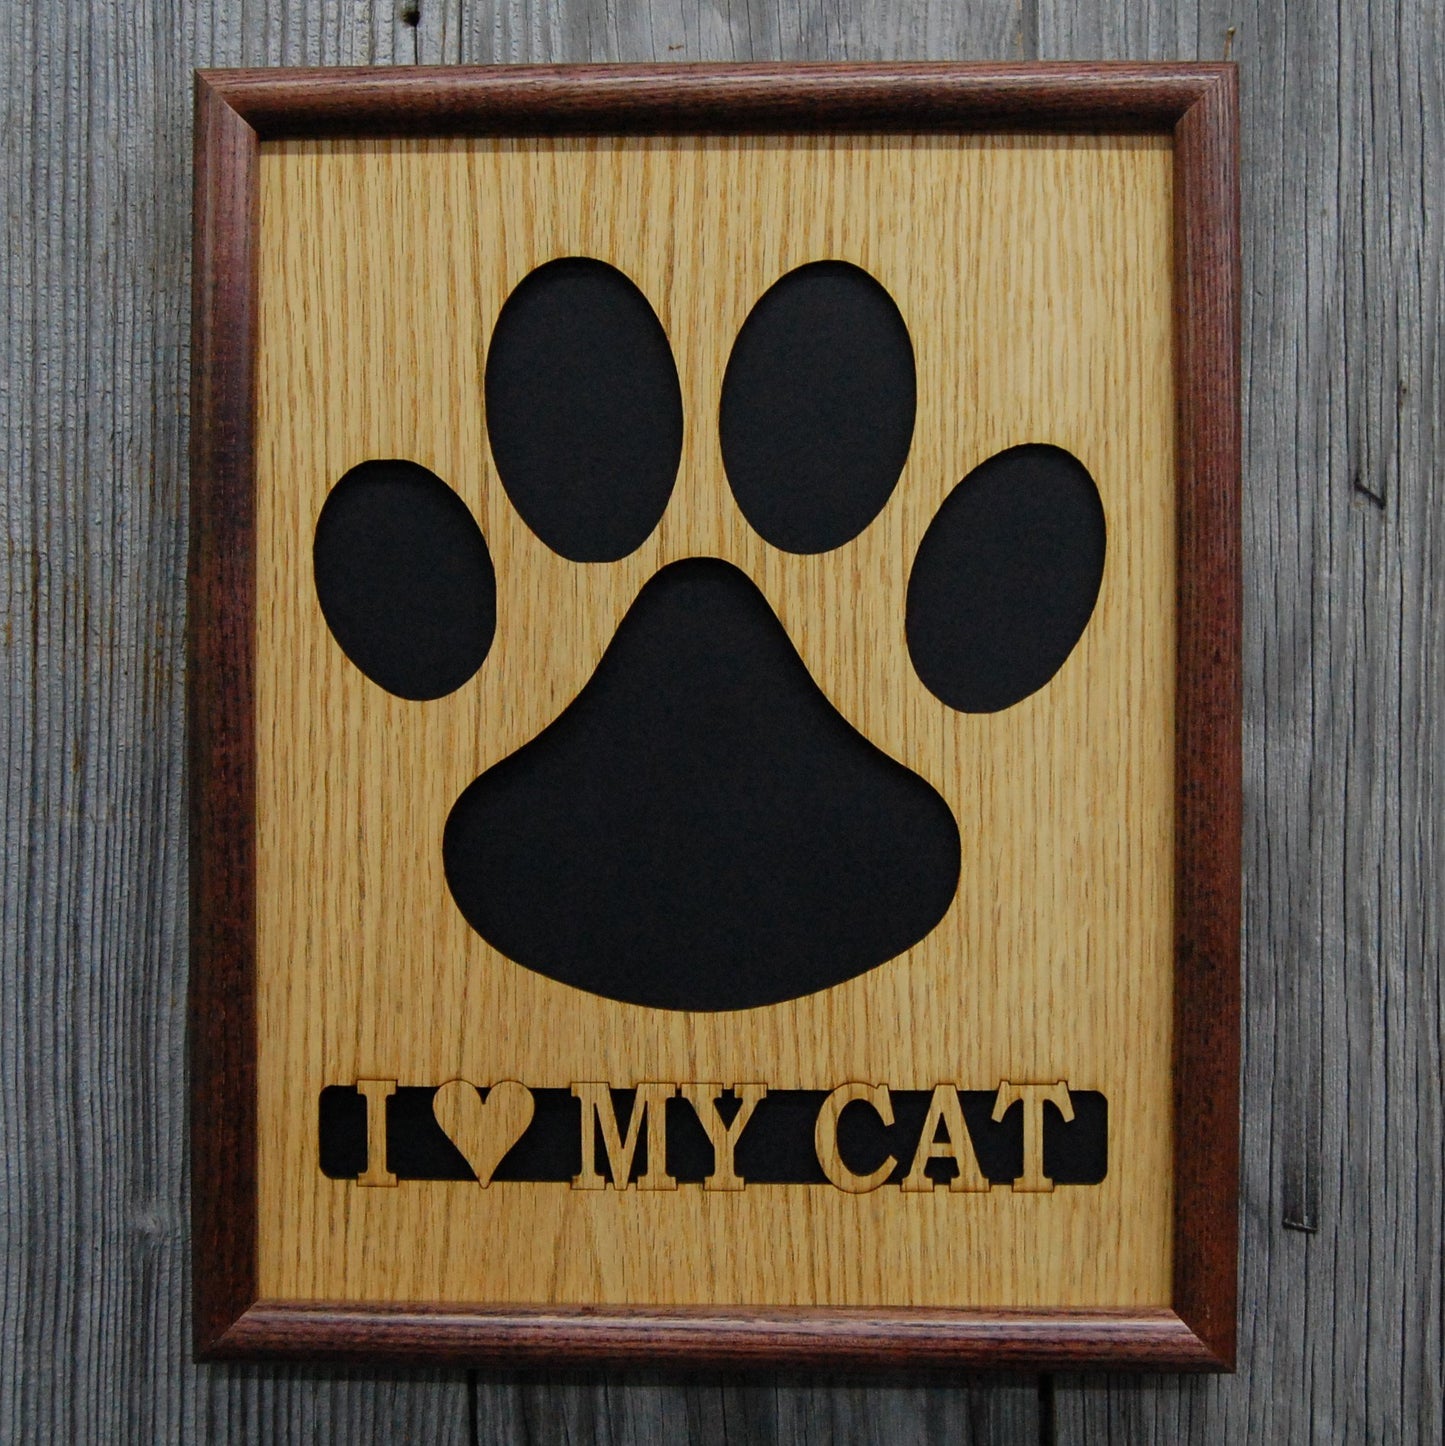 Cat Paw Print Picture Frame 11x14